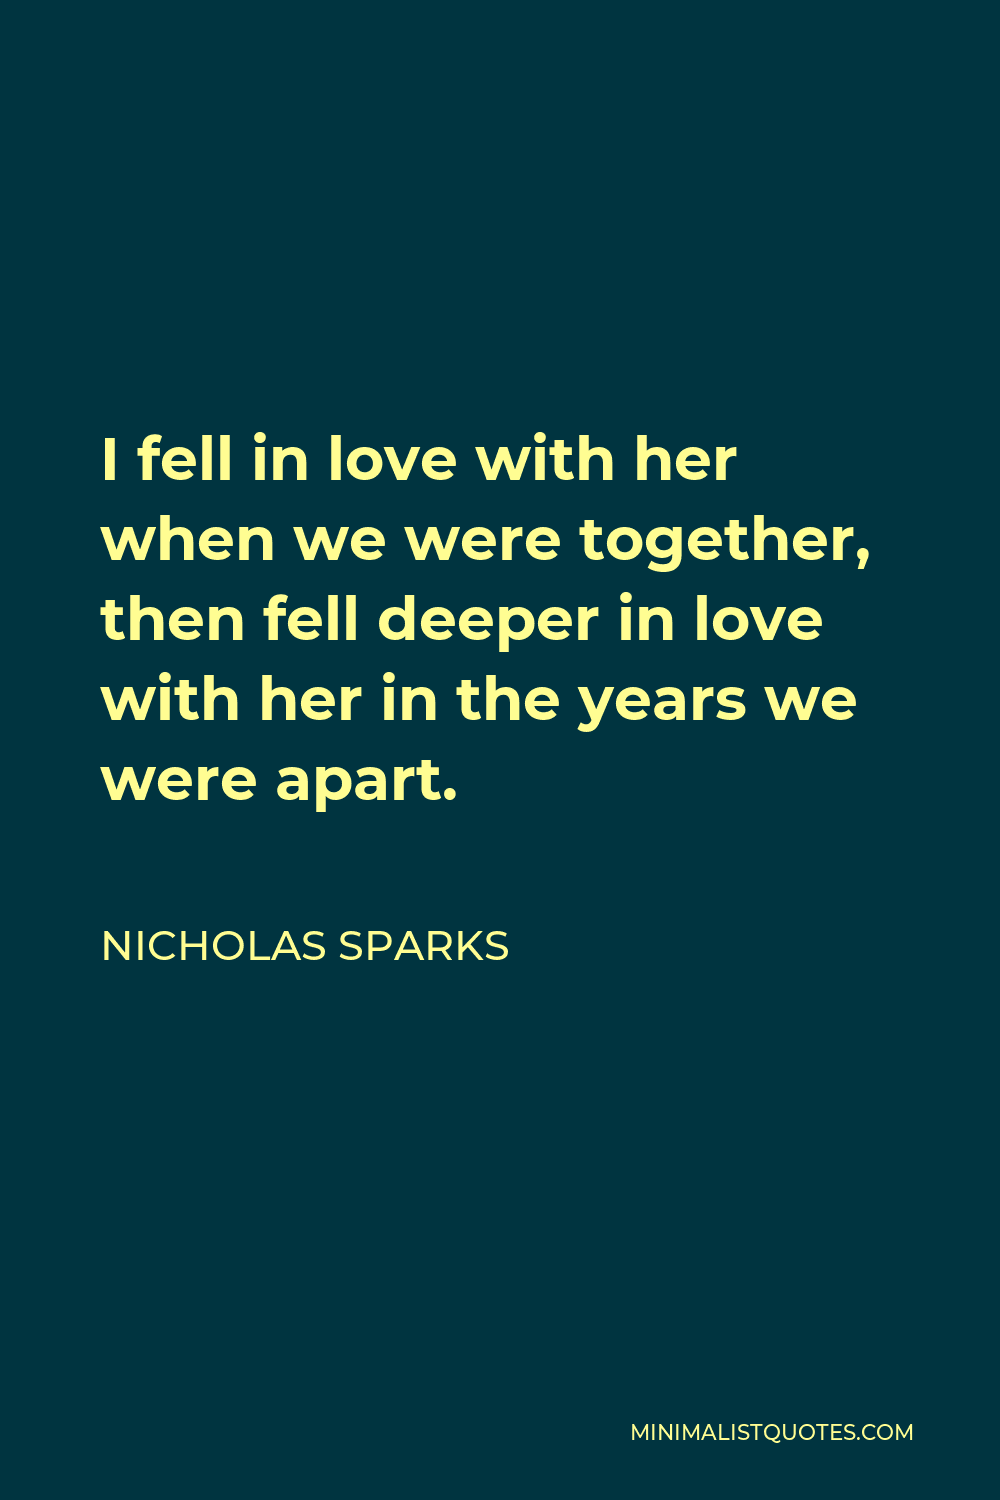 Nicholas Sparks Quote - I fell in love with her when we were together, then fell deeper in love with her in the years we were apart.